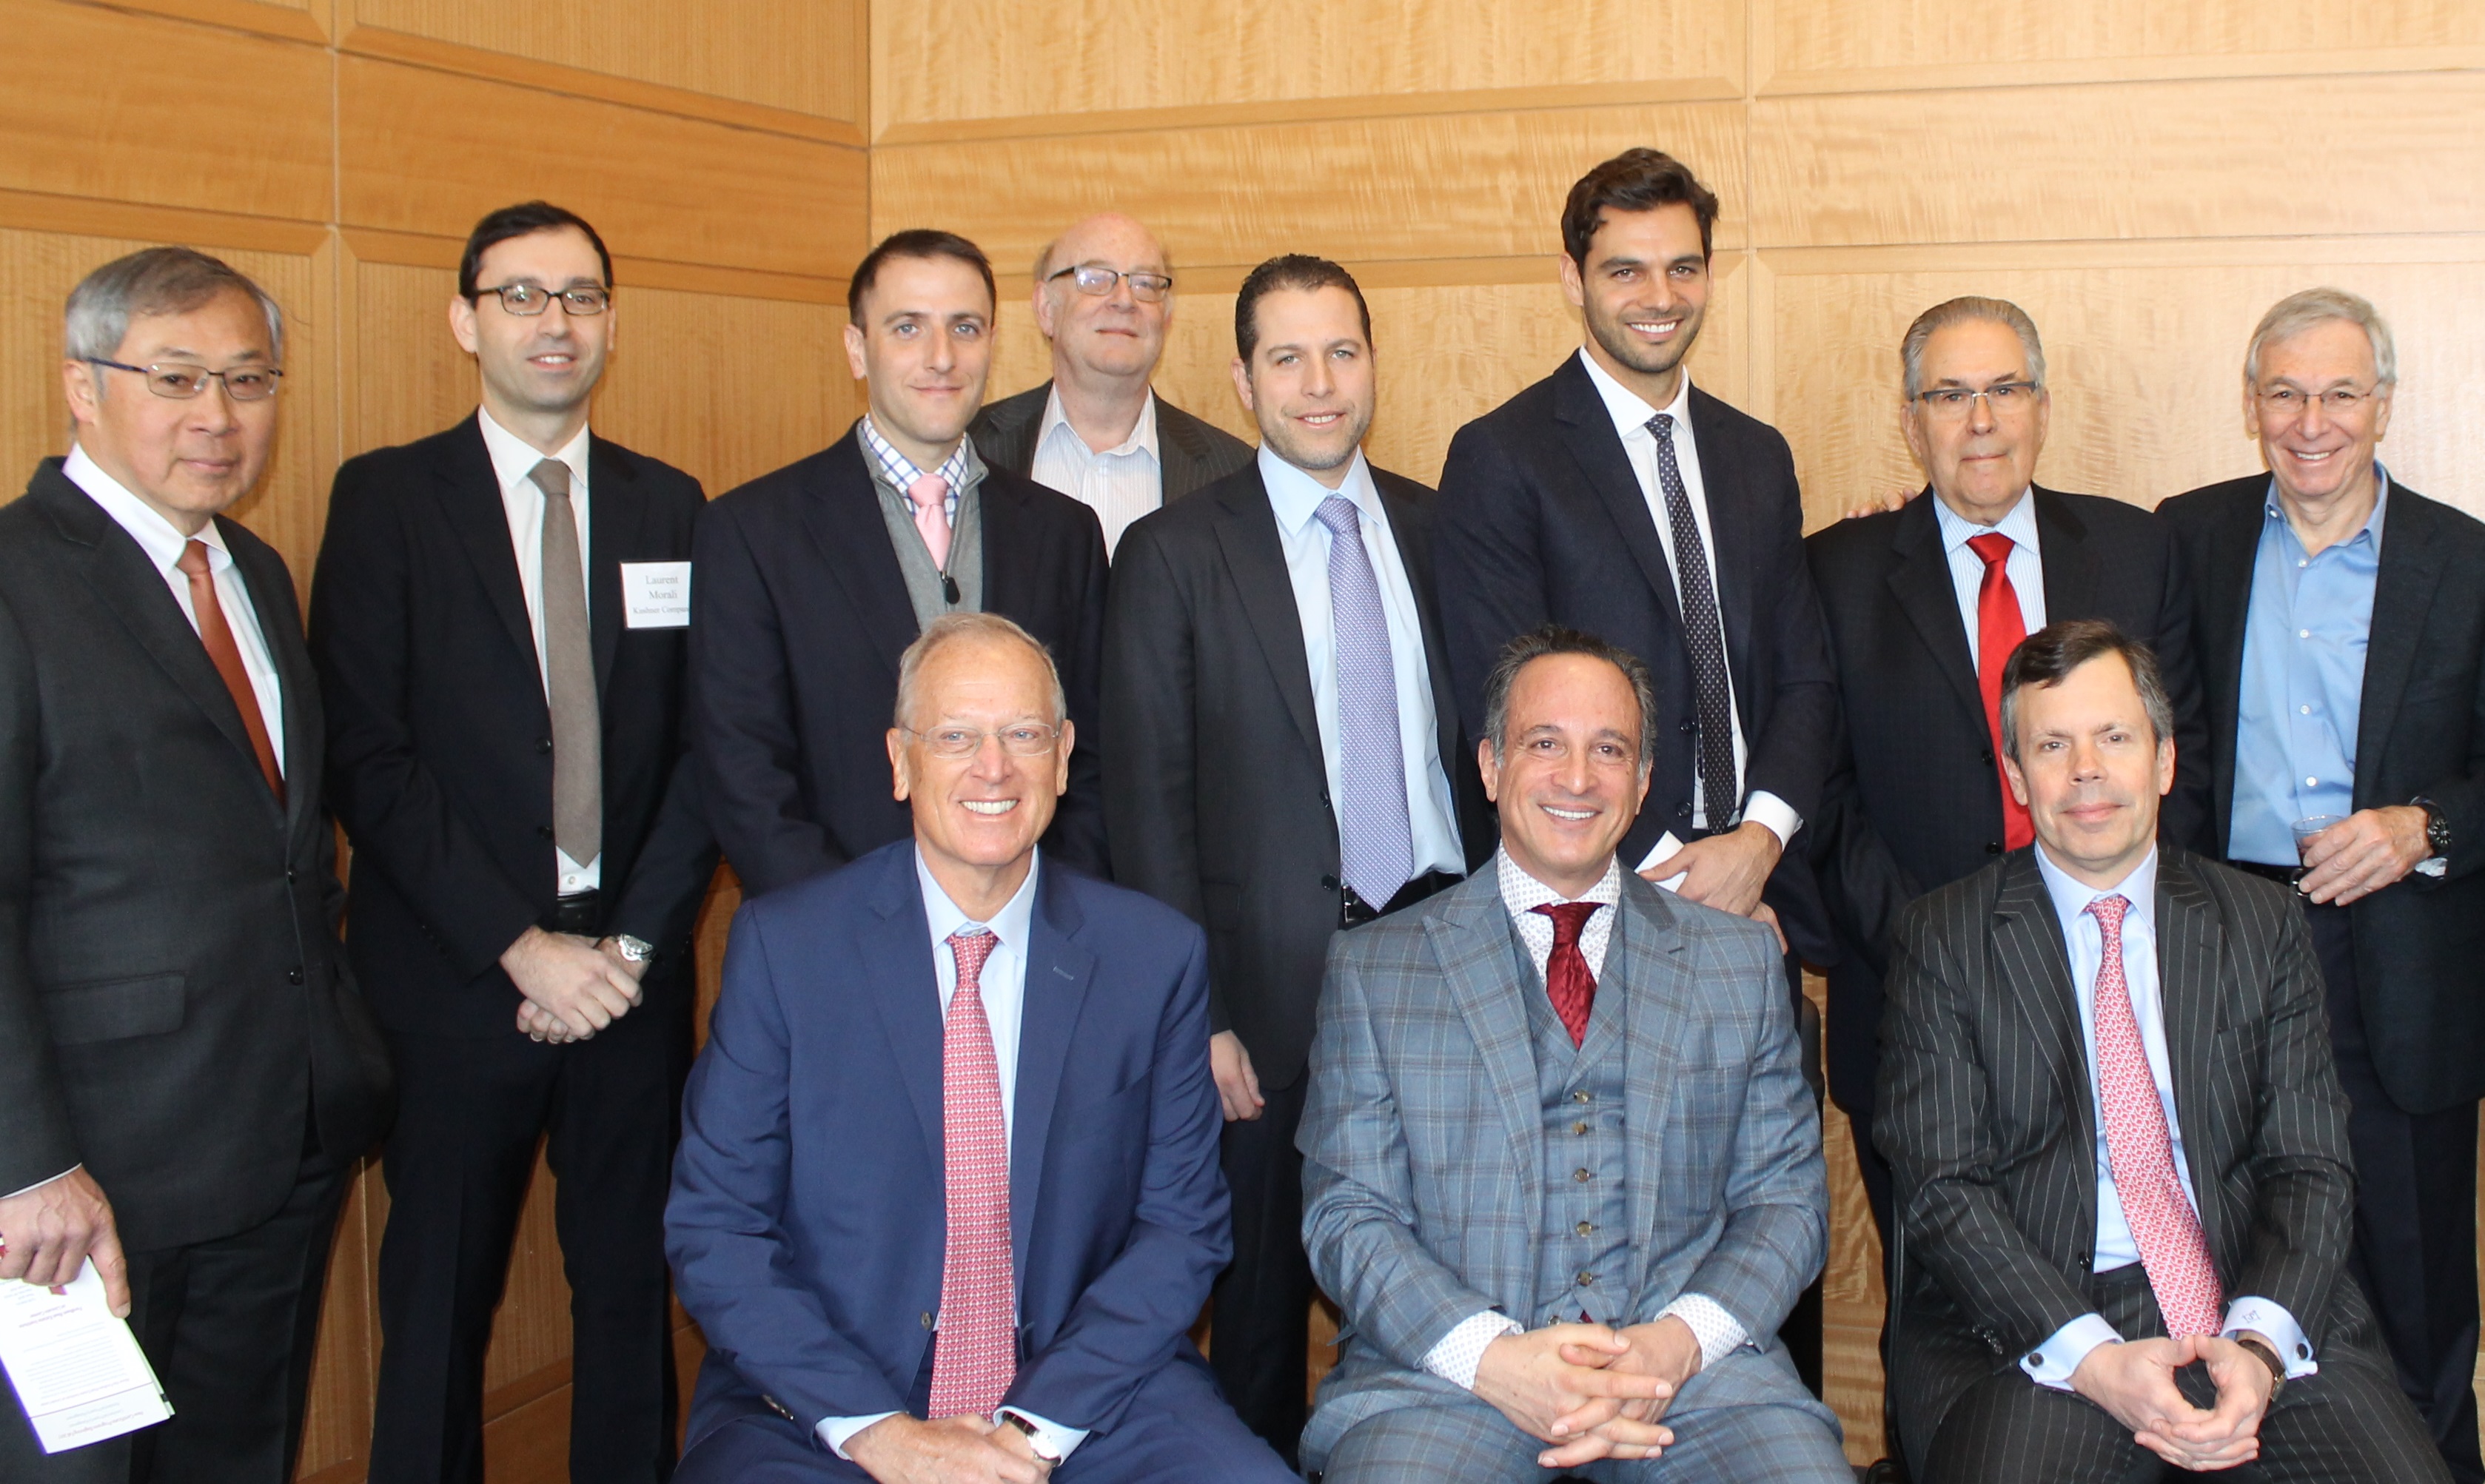 Michael Stoler (back row, second from right) with the participants of “Residential Real Estate: Trends and Forecasts,” the inaugural event from the Fordham Real Estate Institute at Lincoln Center.